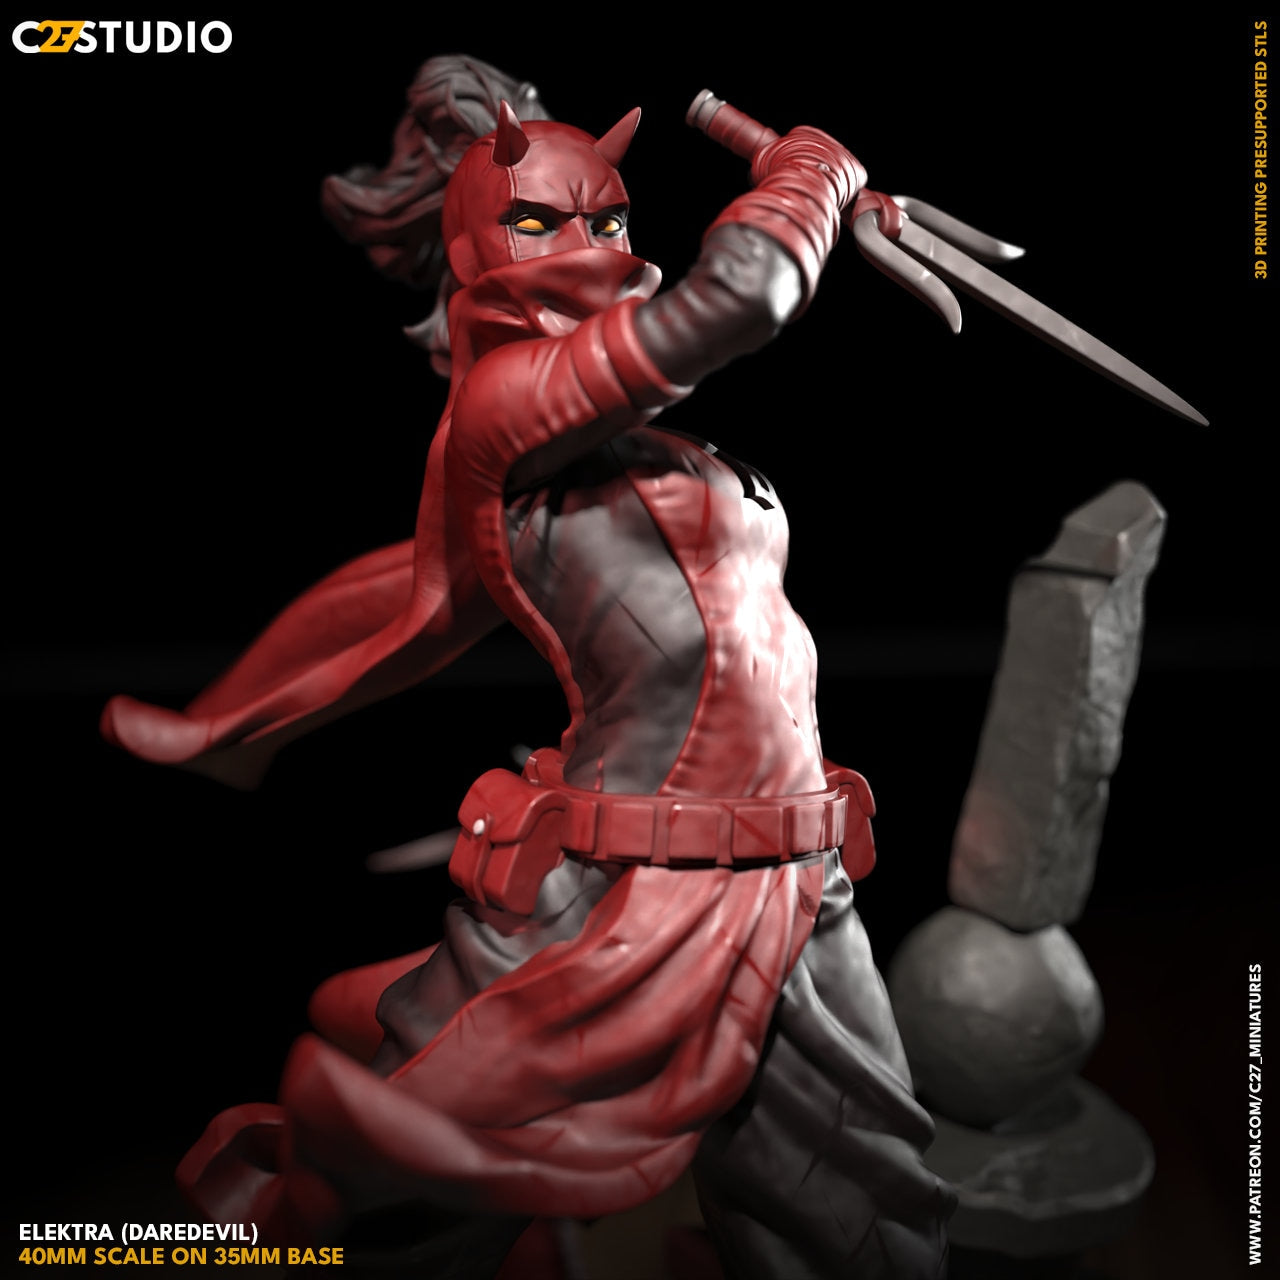 Elektra - Daredevil / Woman Without Fear 40mm miniature (sculpted by C27 collectibles) (Crisis Protocol Proxy/Alternative)